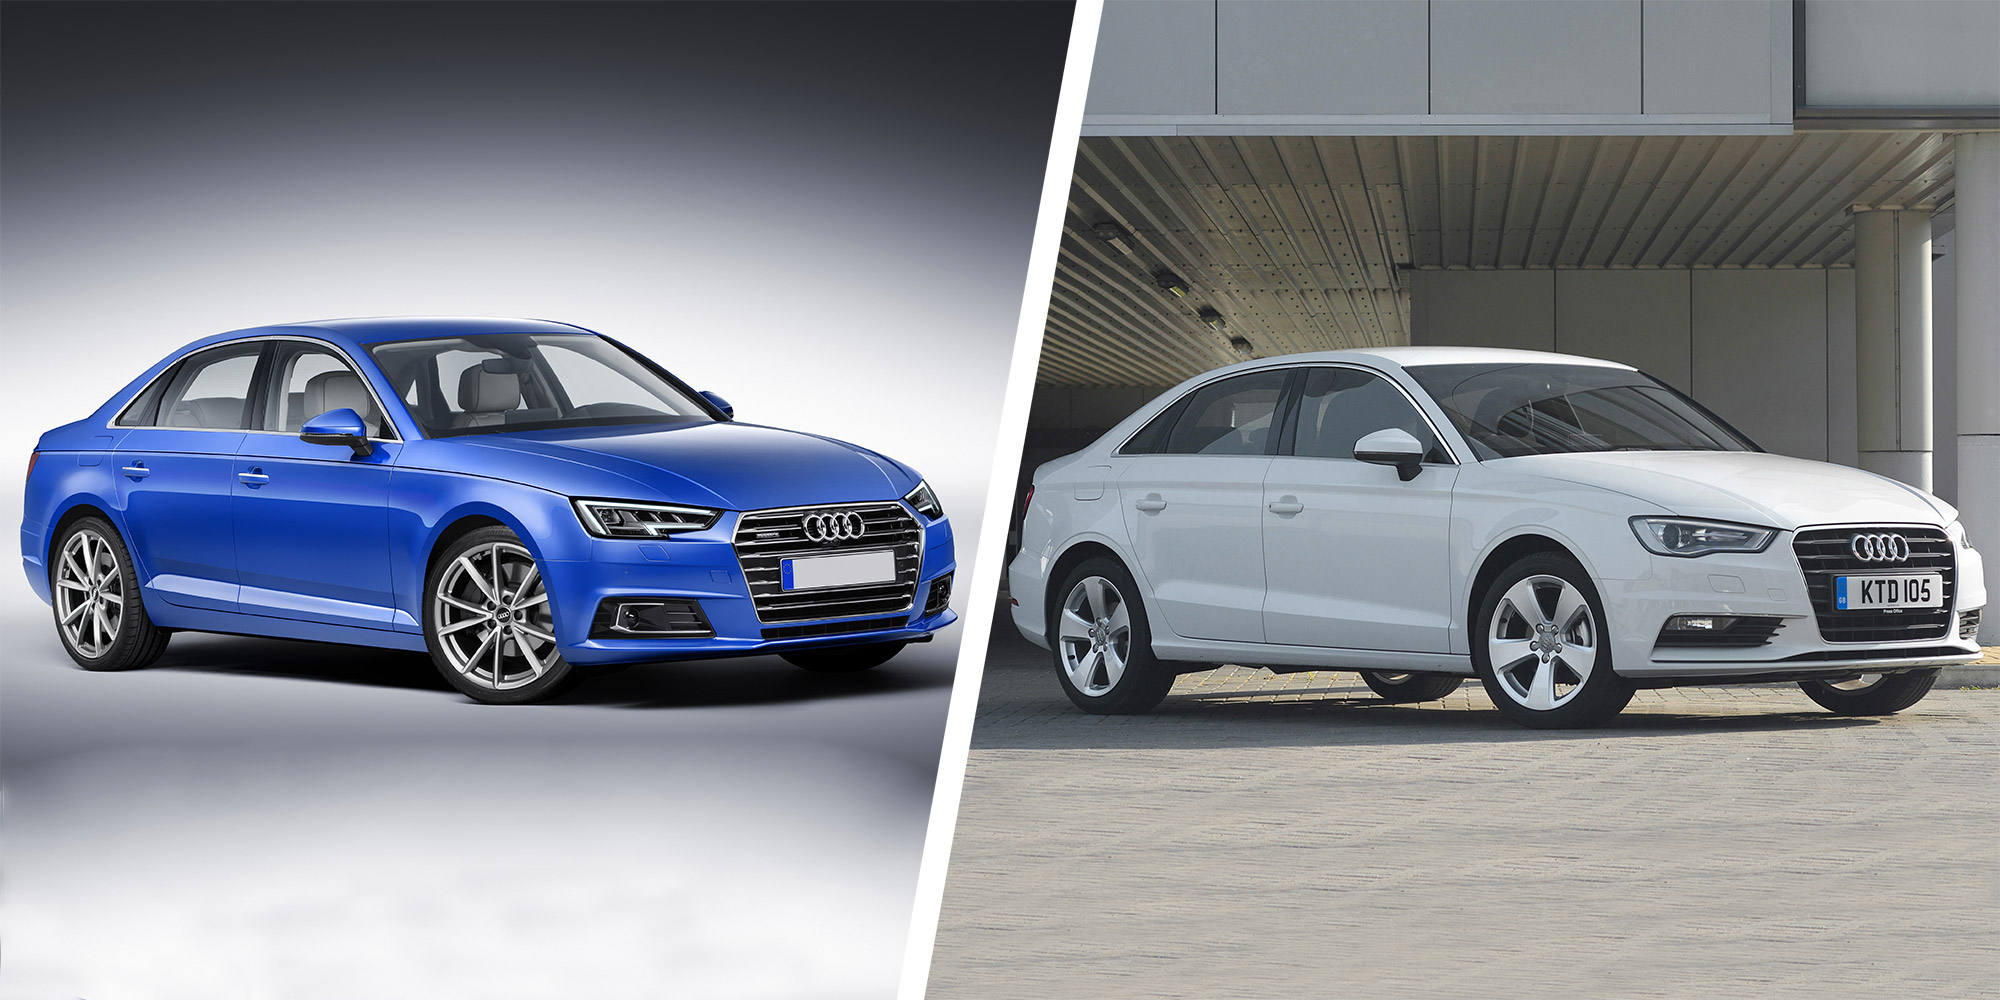 Audi A3 vs. A4 - Which One Should You Get?